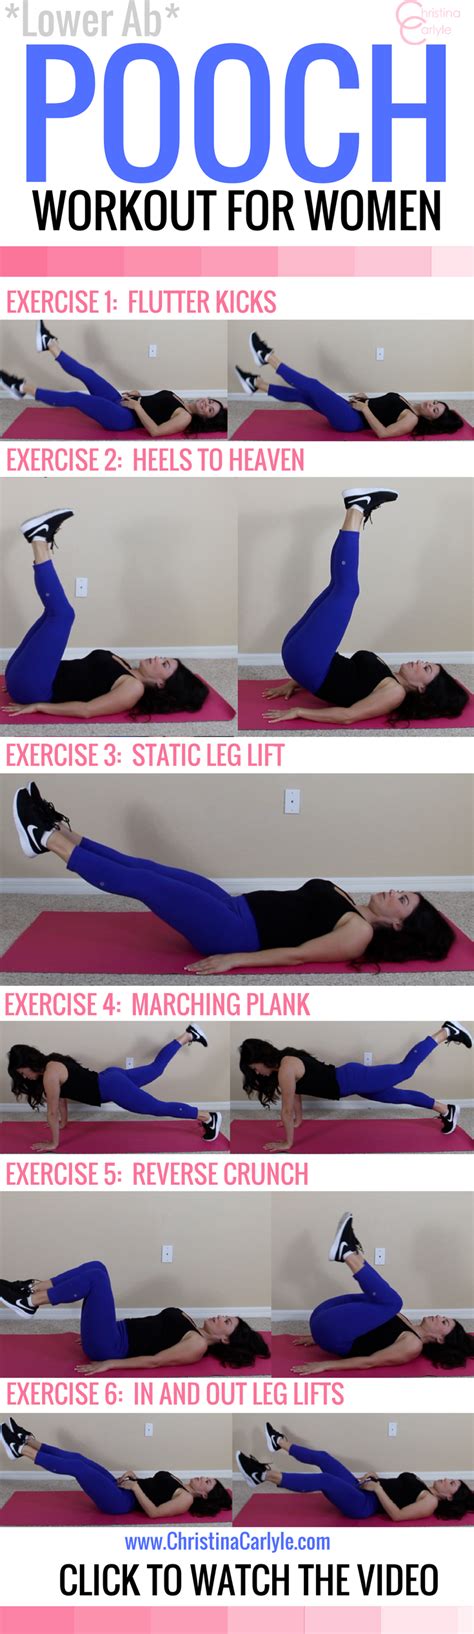 Want To Flatter Your Lower Ab Pooch The 6 Low Ab Exercises In This Pooch Workout Will Flatten